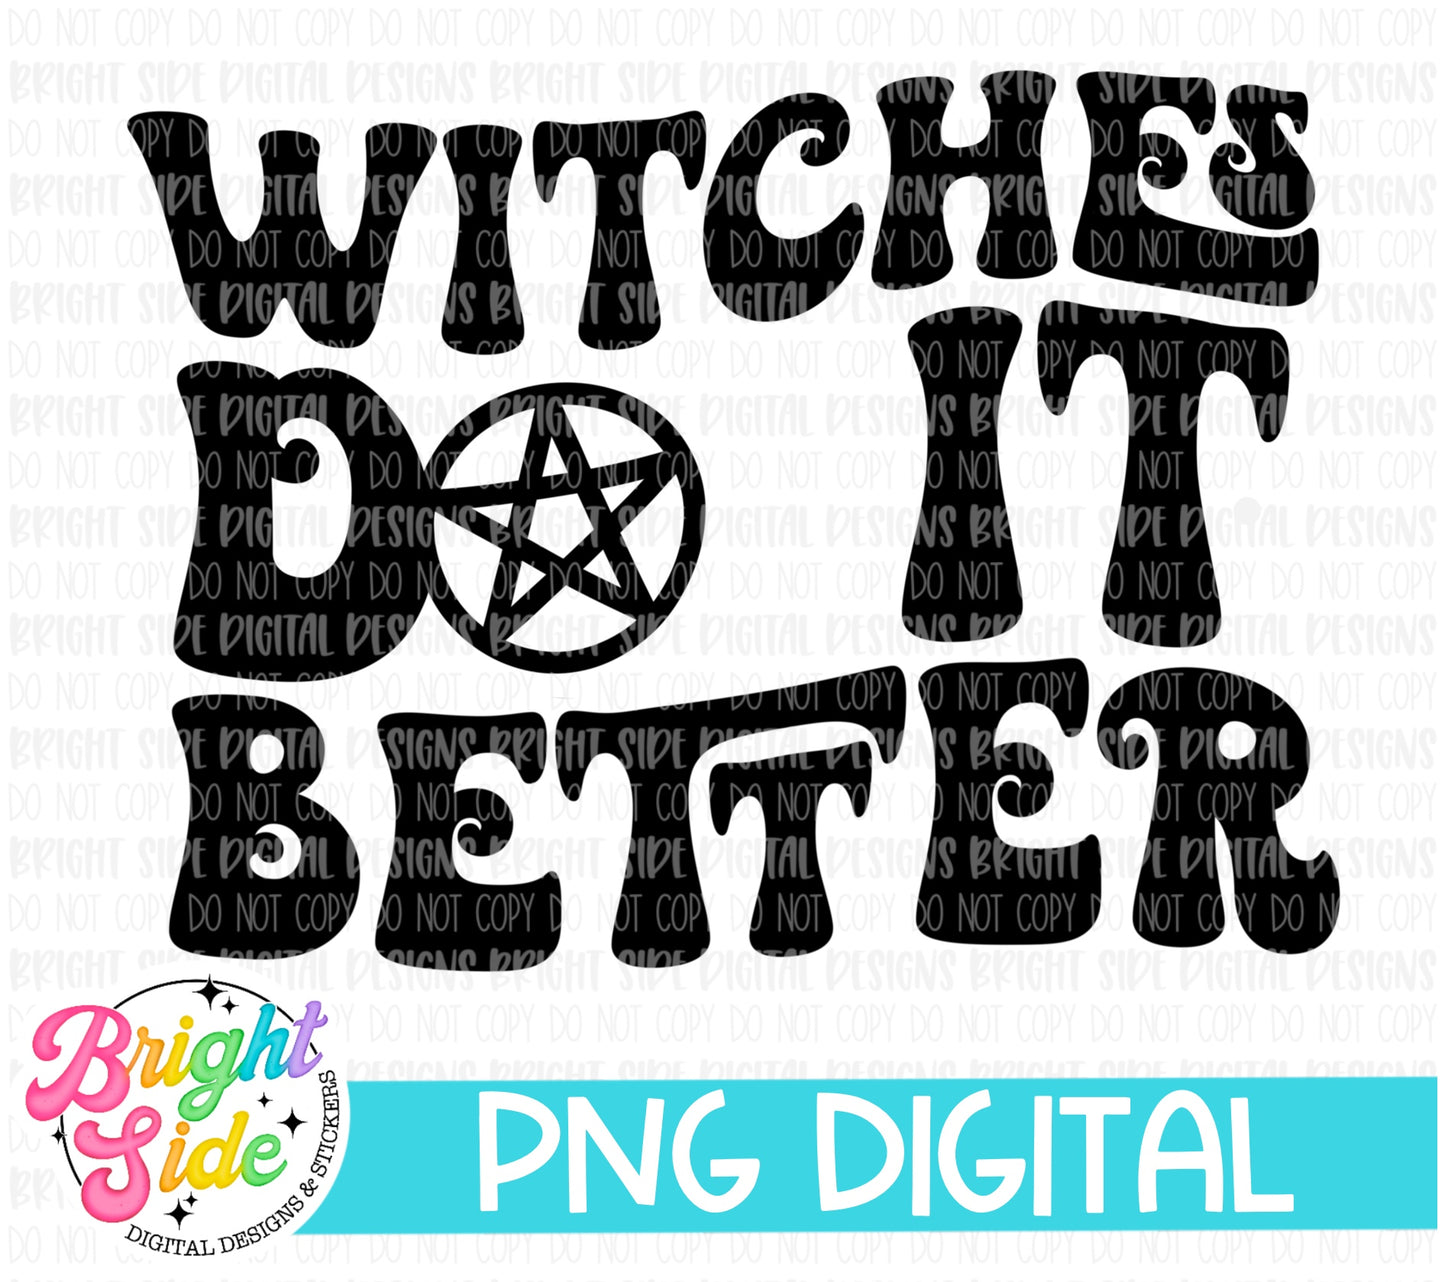 Witches do it better